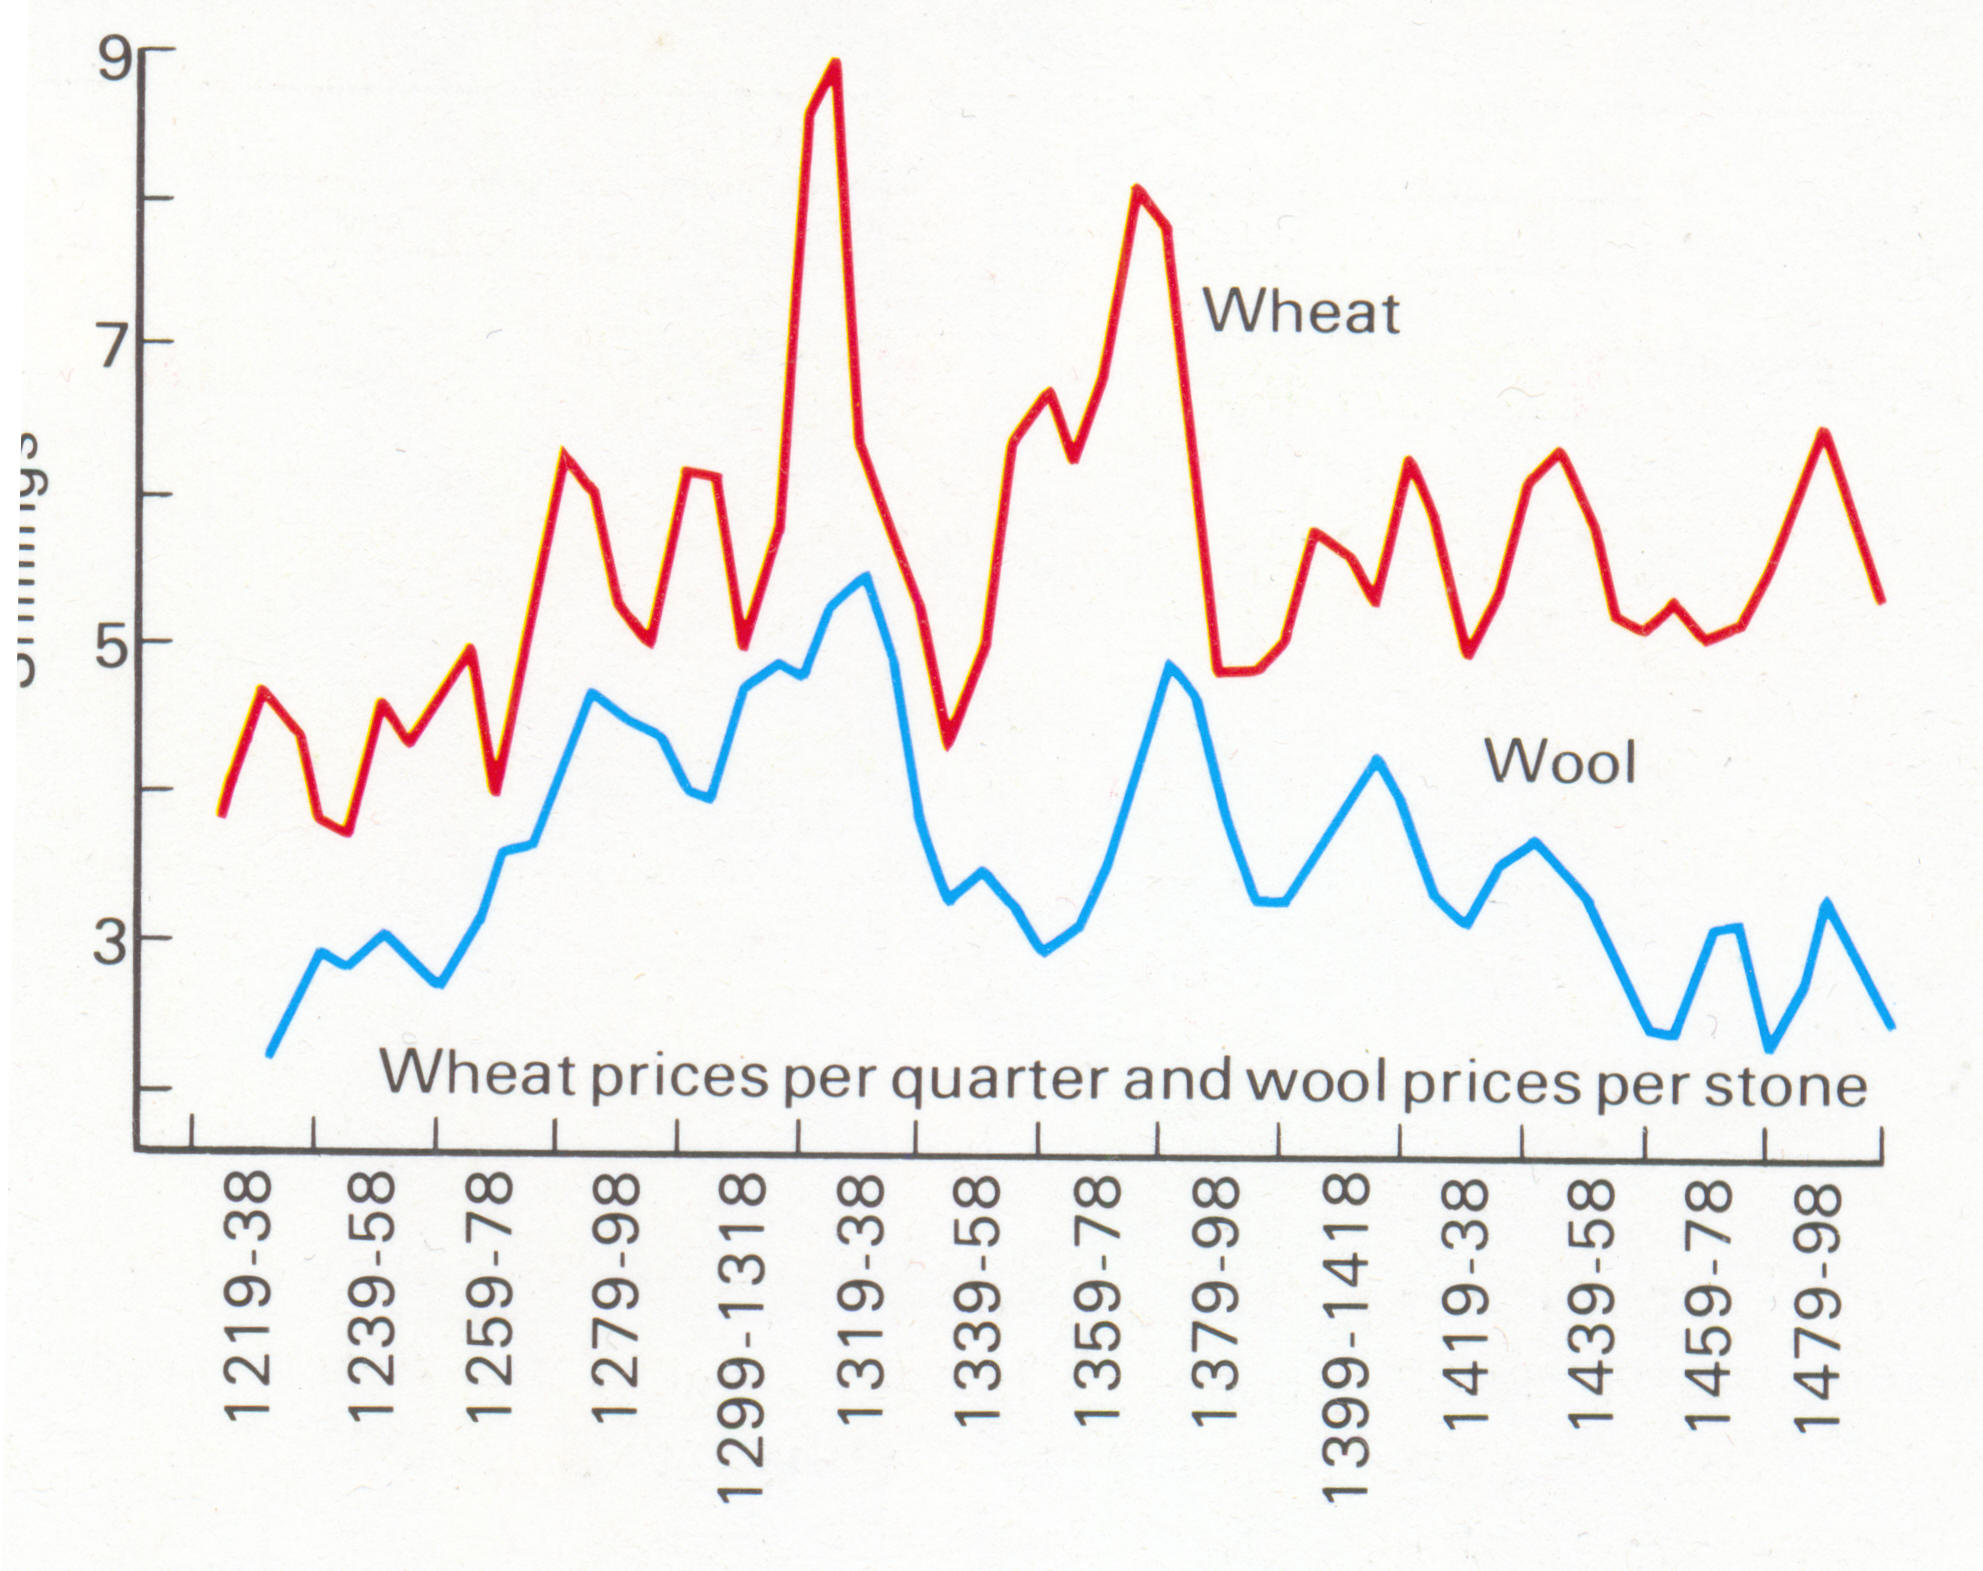 The underlying trends revealed by this graph show steadily rising prices both for wheat and wool during the 13th century followed by a period of stable or declining prices in the following two centuries.